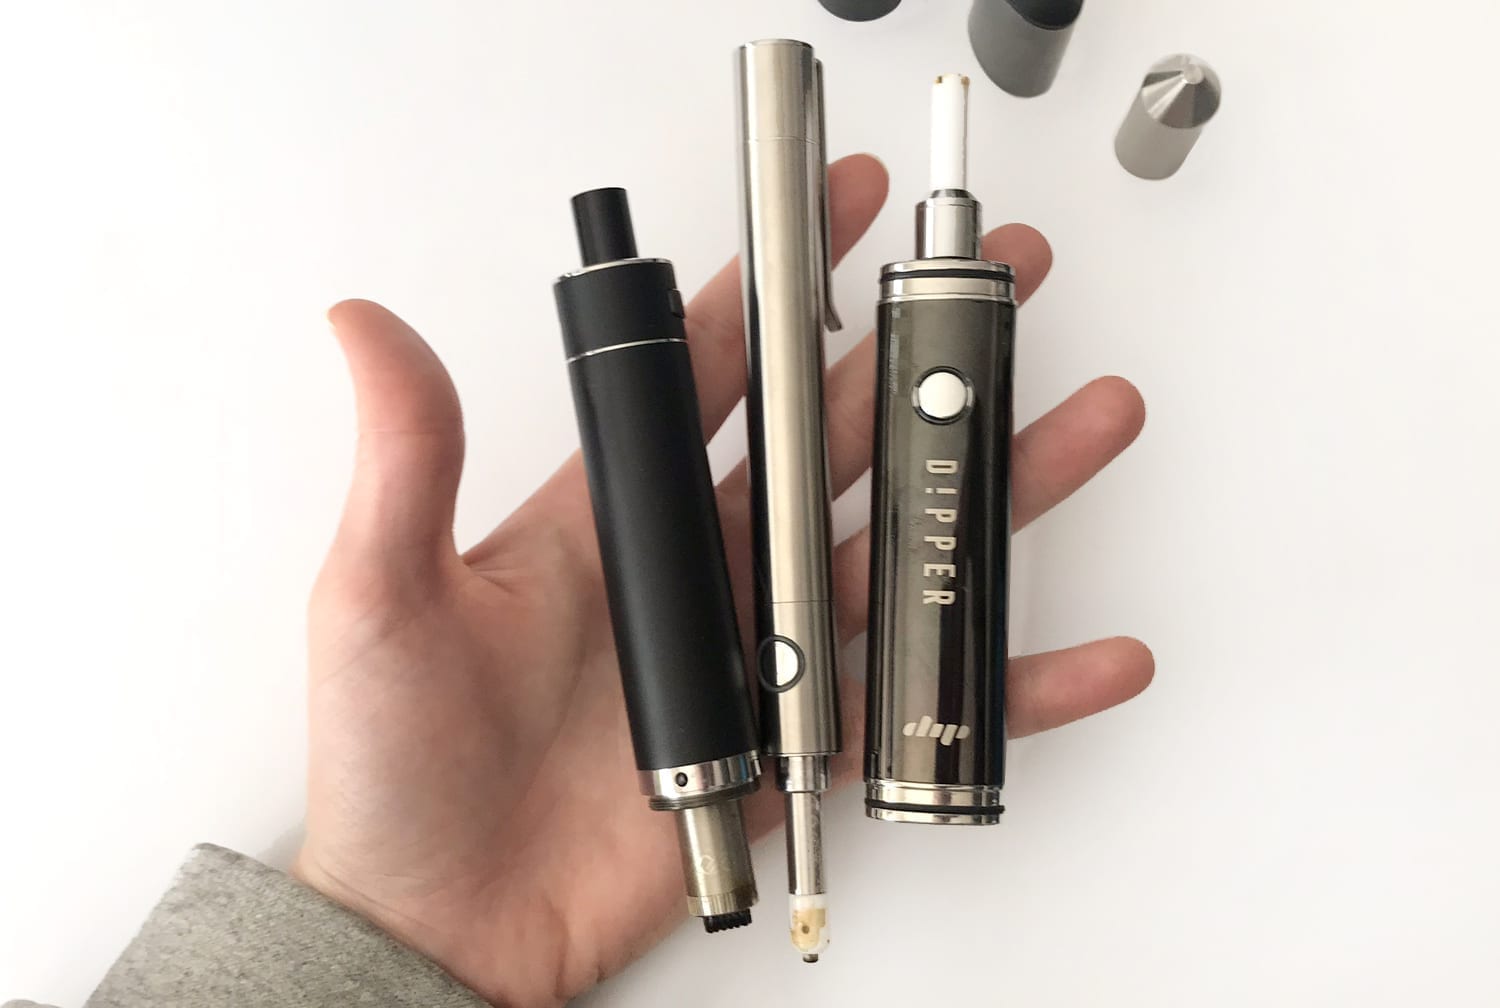 3 in 1 electric nectar collector